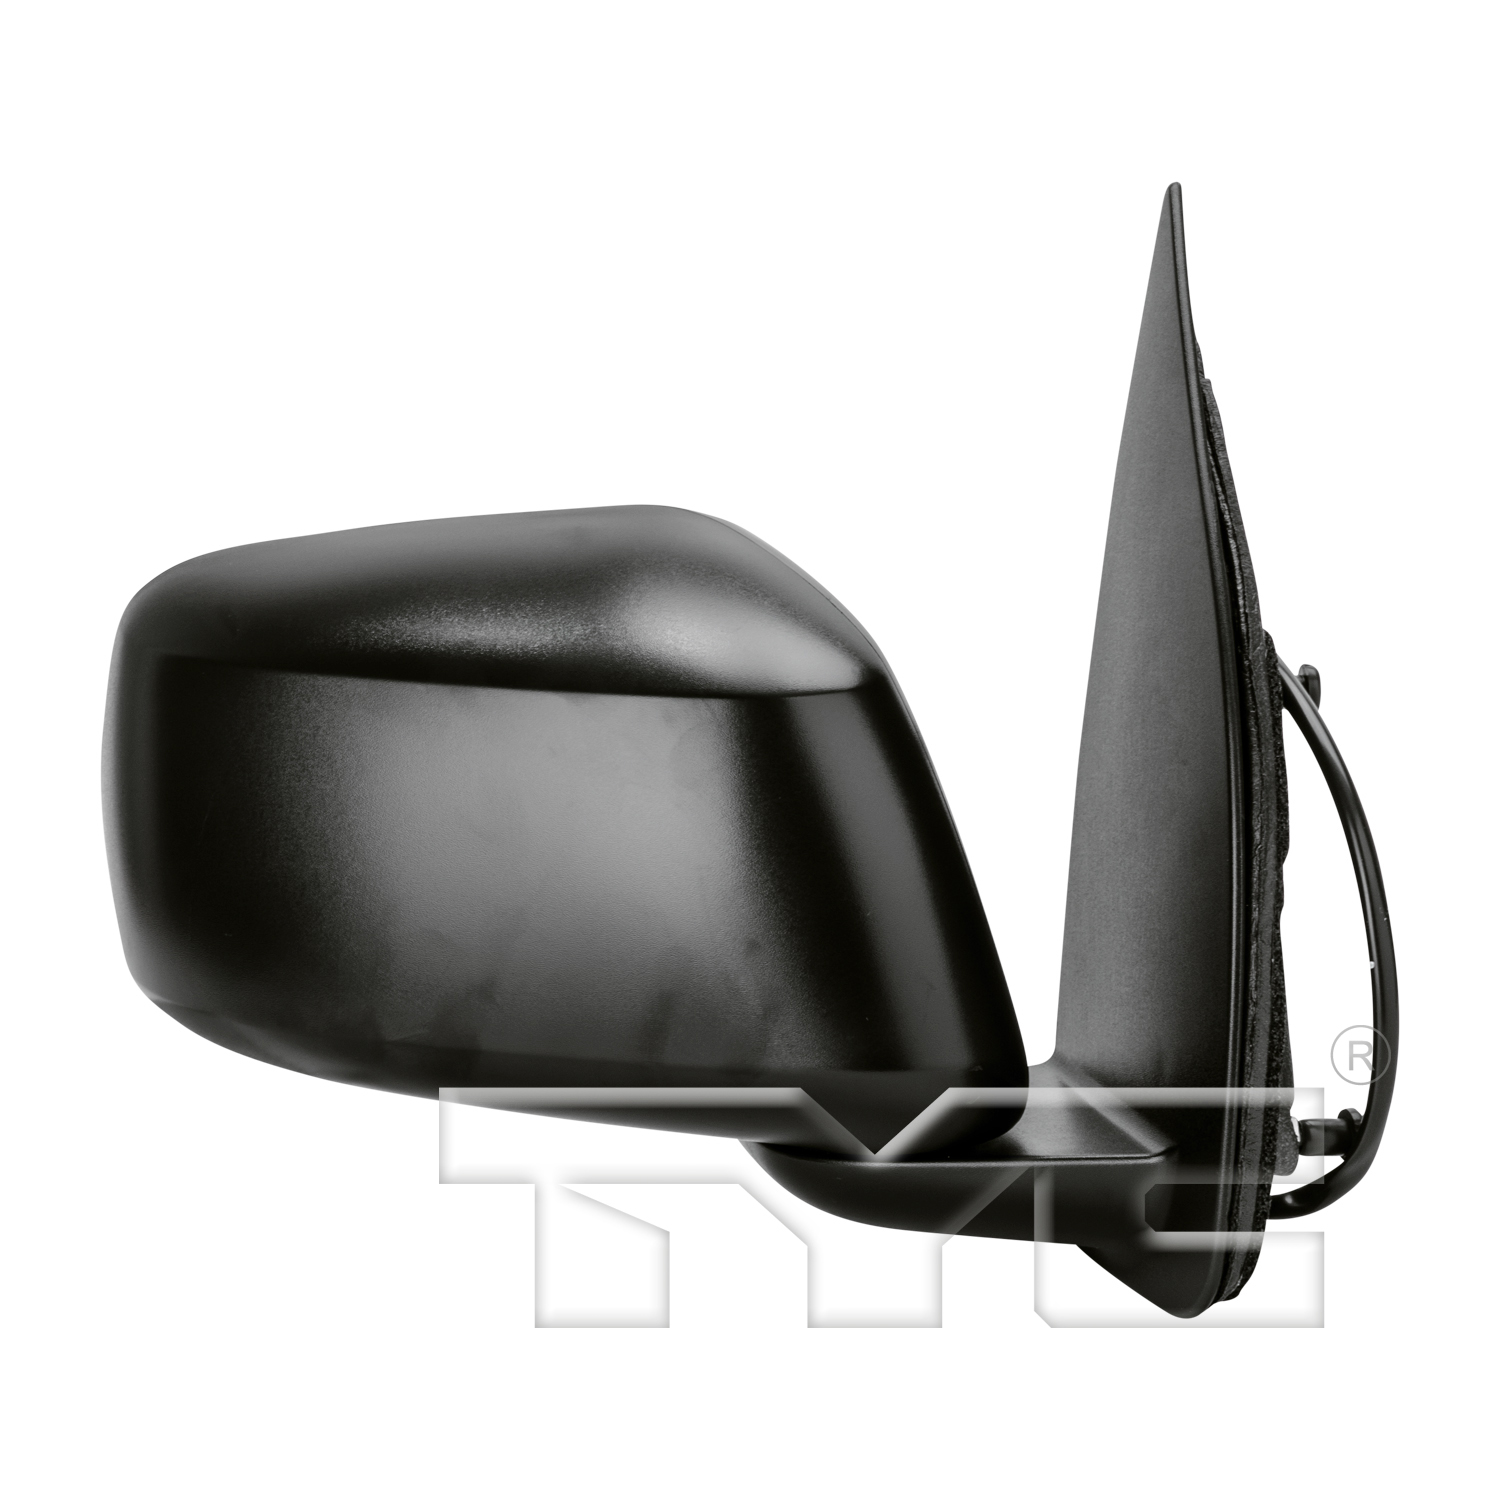 Aftermarket MIRRORS for NISSAN - FRONTIER, FRONTIER,05-09,RT Mirror outside rear view